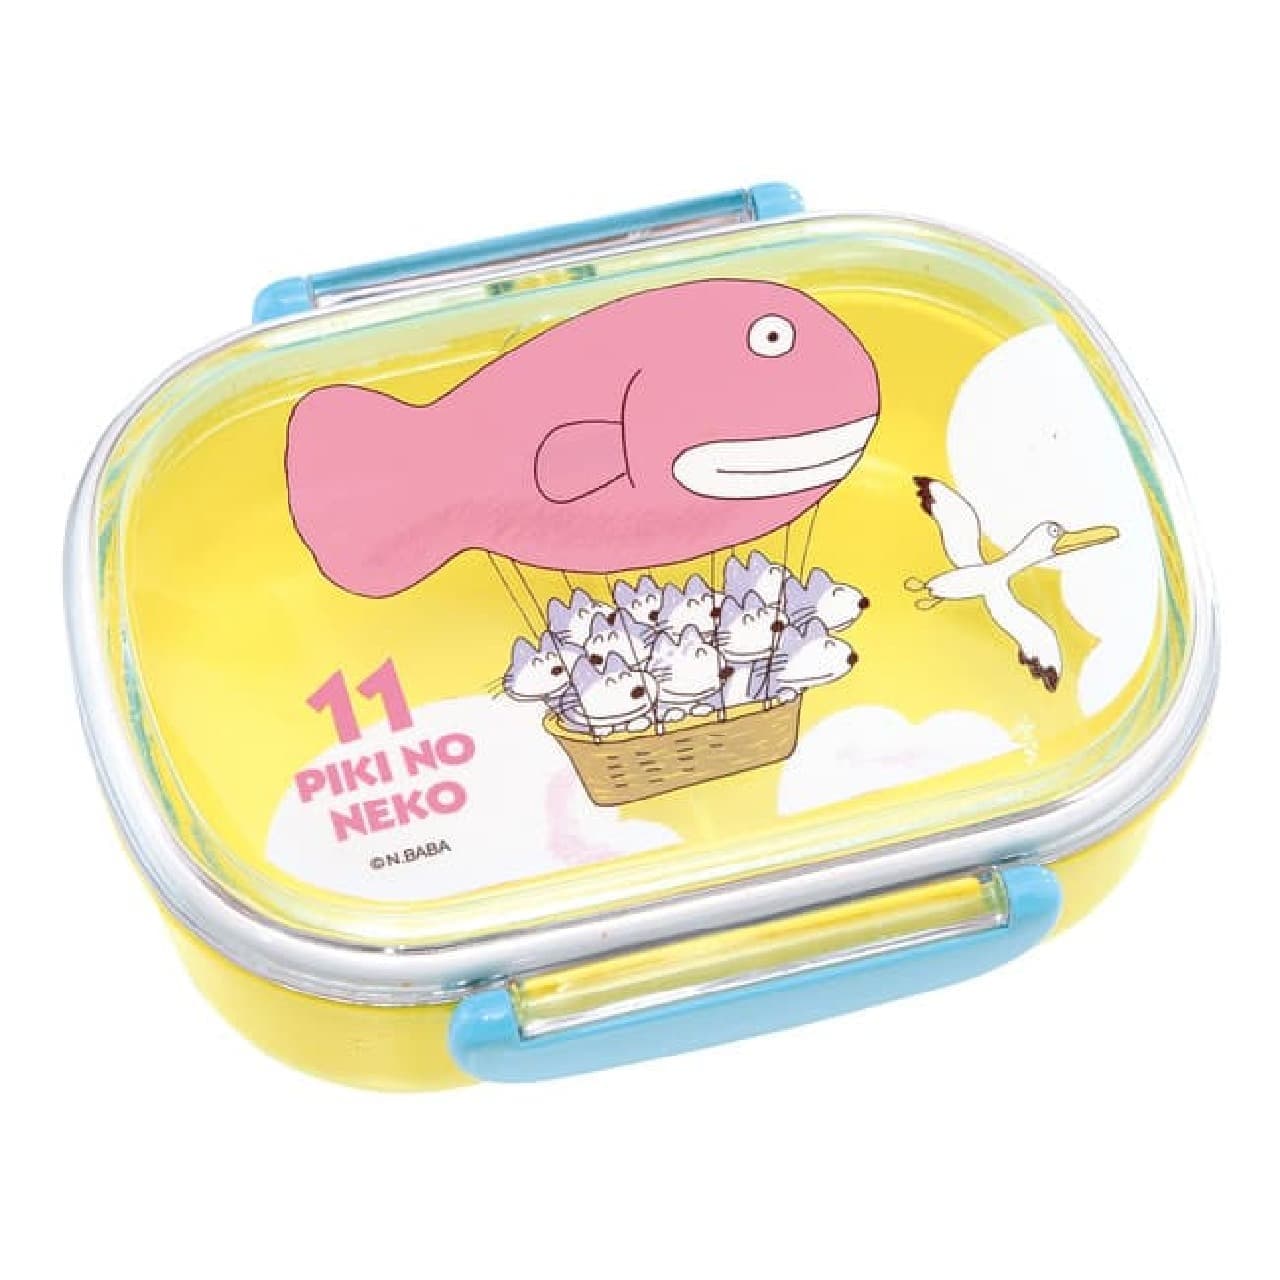 The 11 Pigs and the Red-Bellied Bird" lunchware! Antibacterial and dishwasher-safe lunch boxes, cups, drawstrings, etc.